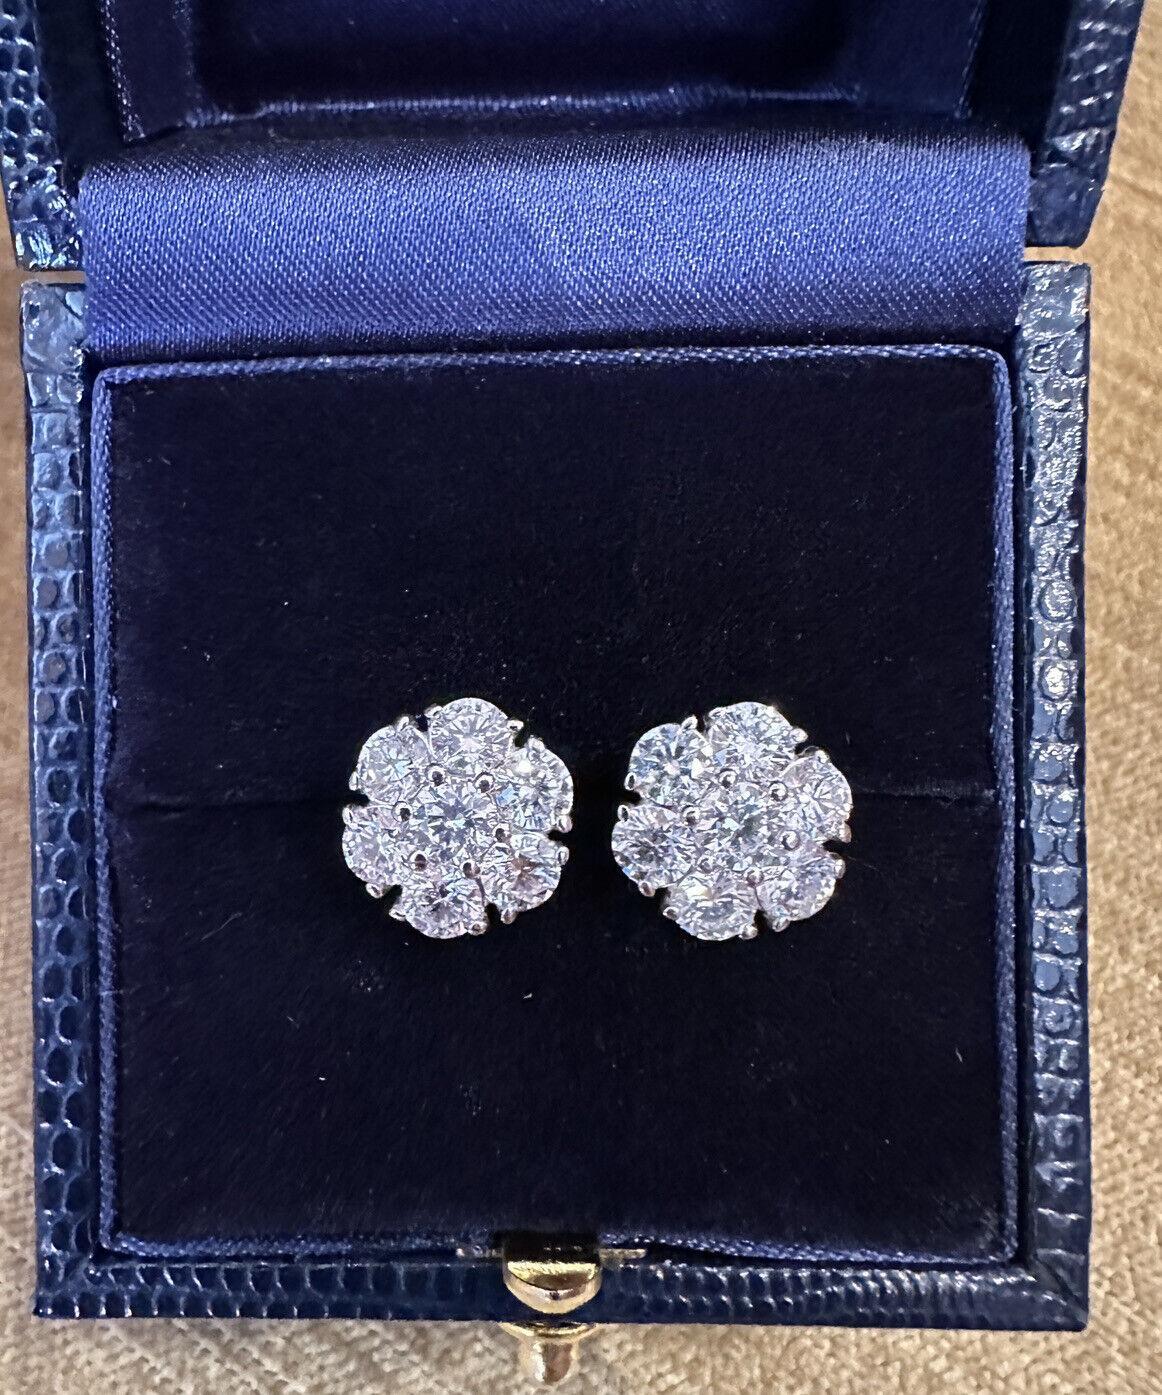 Diamond Floret Cluster Stud Earrings 3.10 Carat Total Weight in 14k White Gold For Sale 1